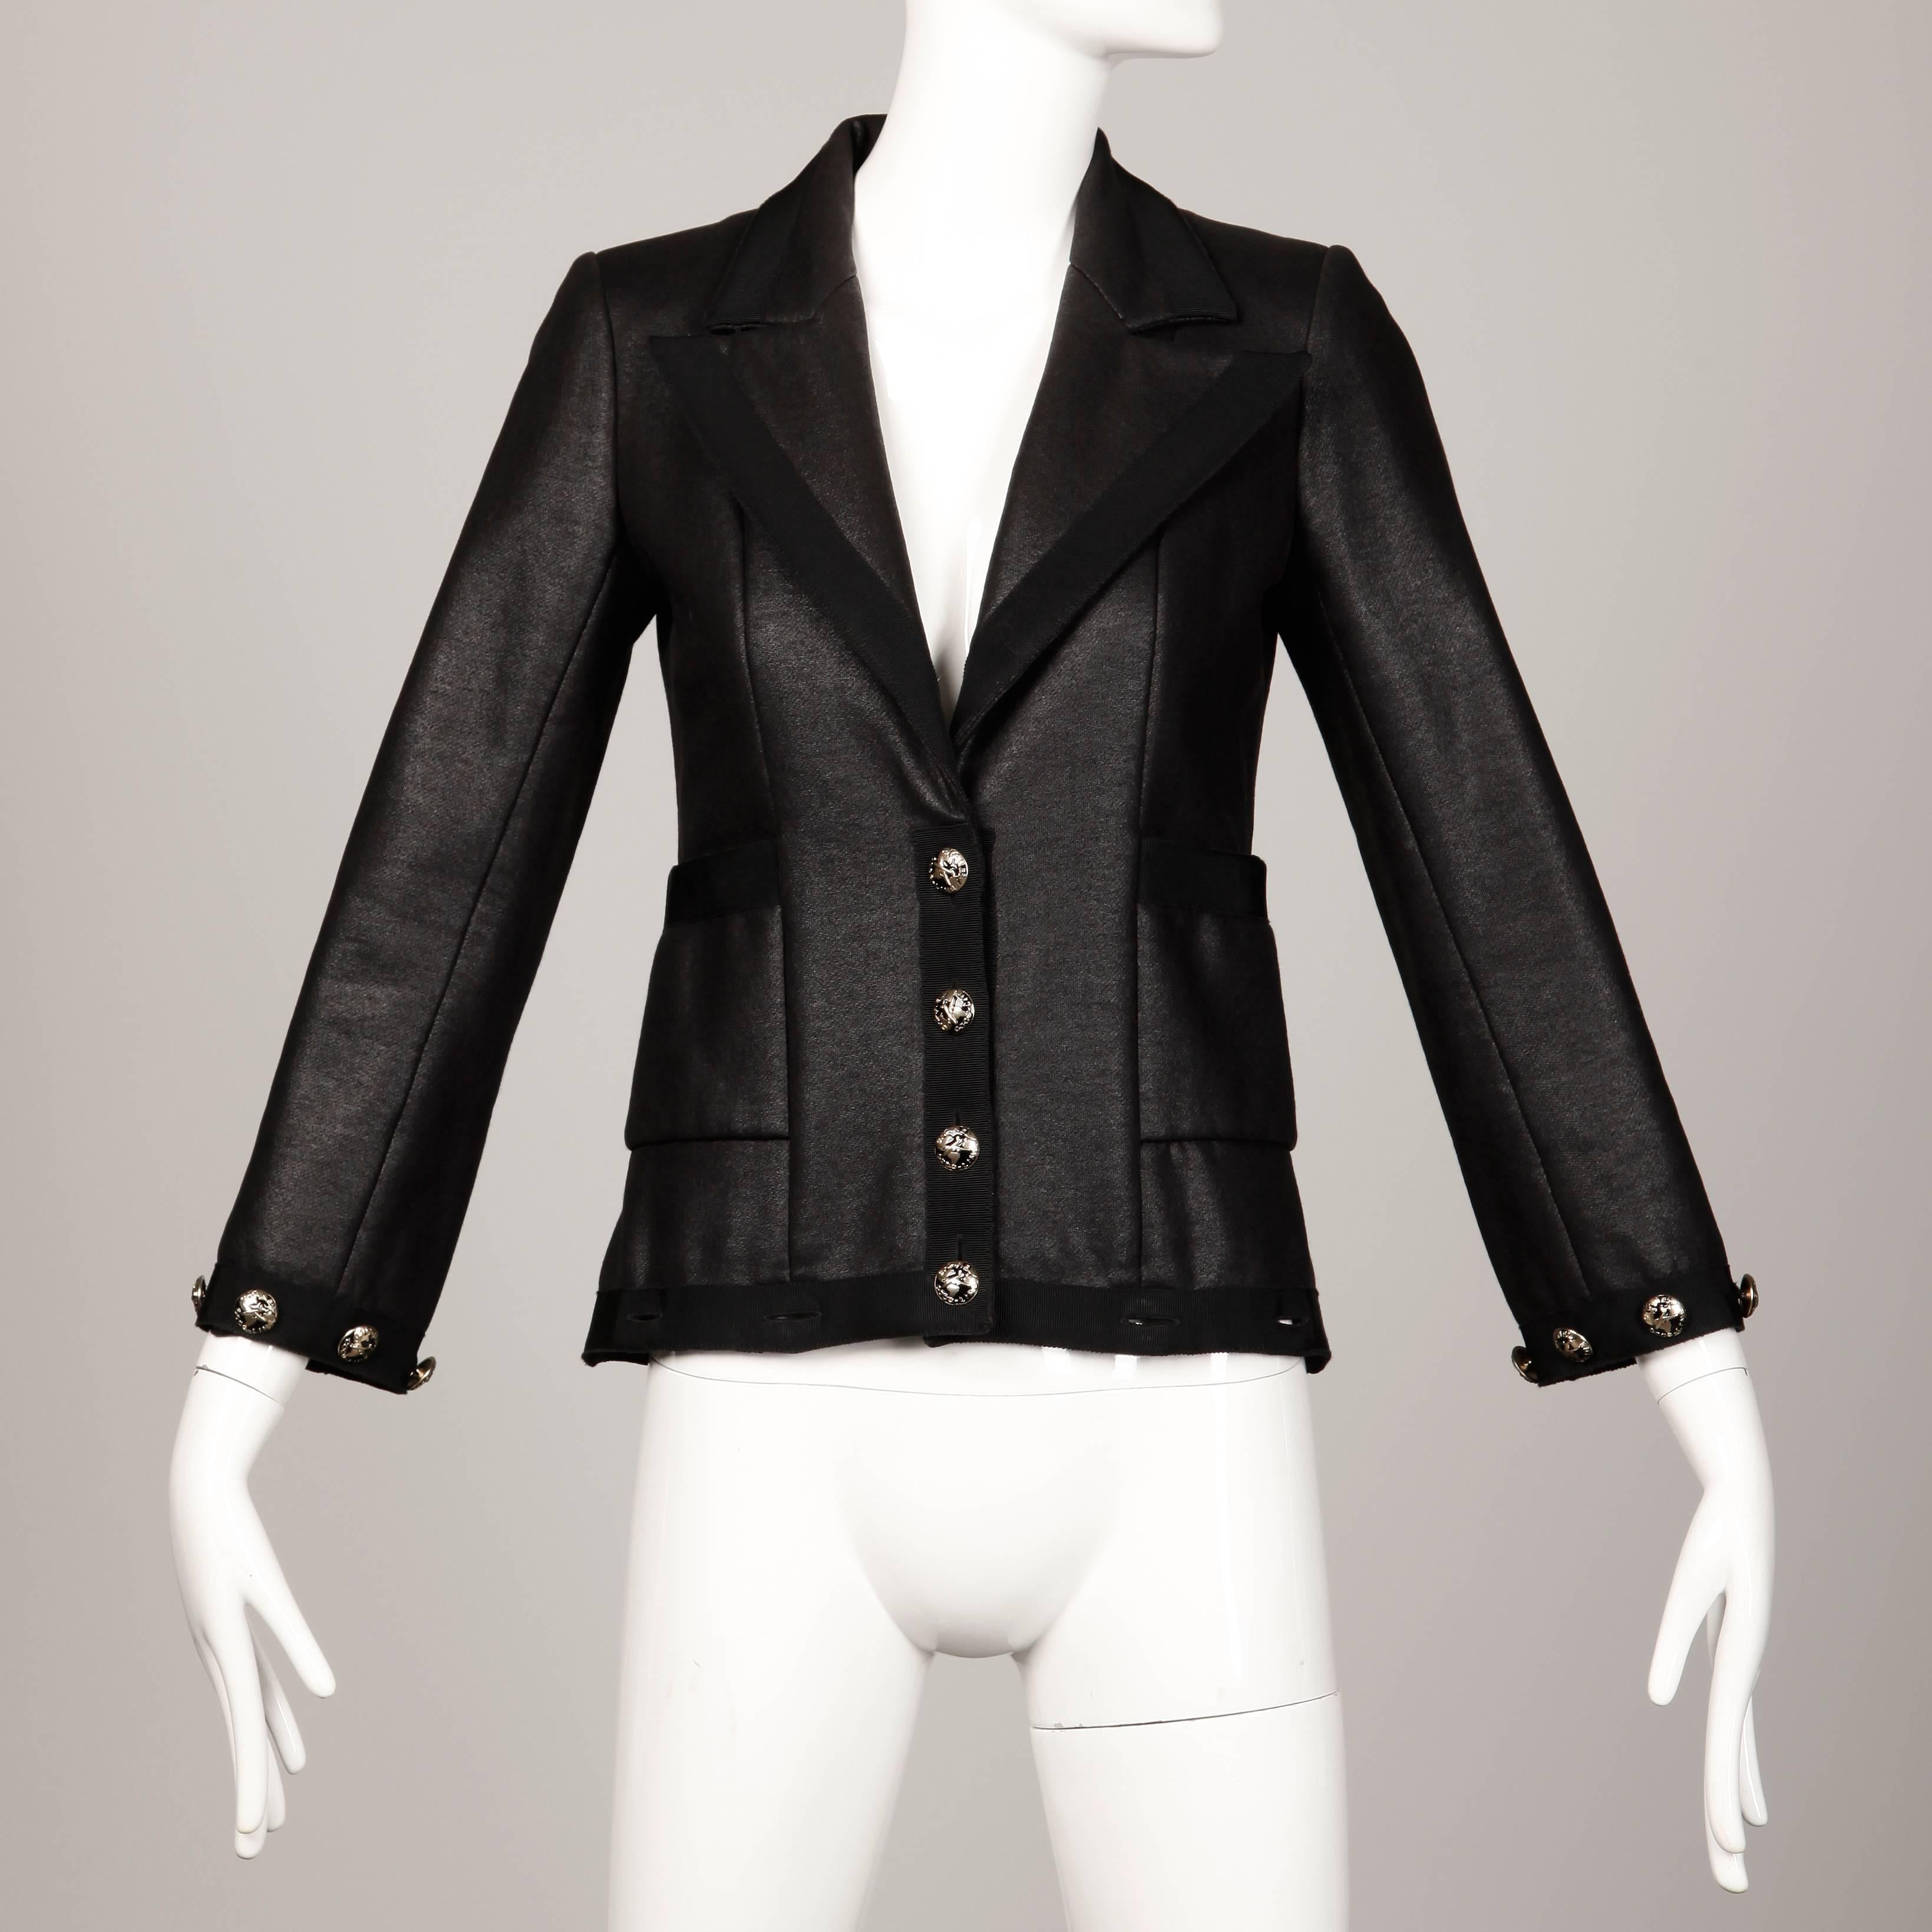 Stunning black Chanel coat that converts to a jacket by buttoning off the bottom panel! From Chanel's 2008 